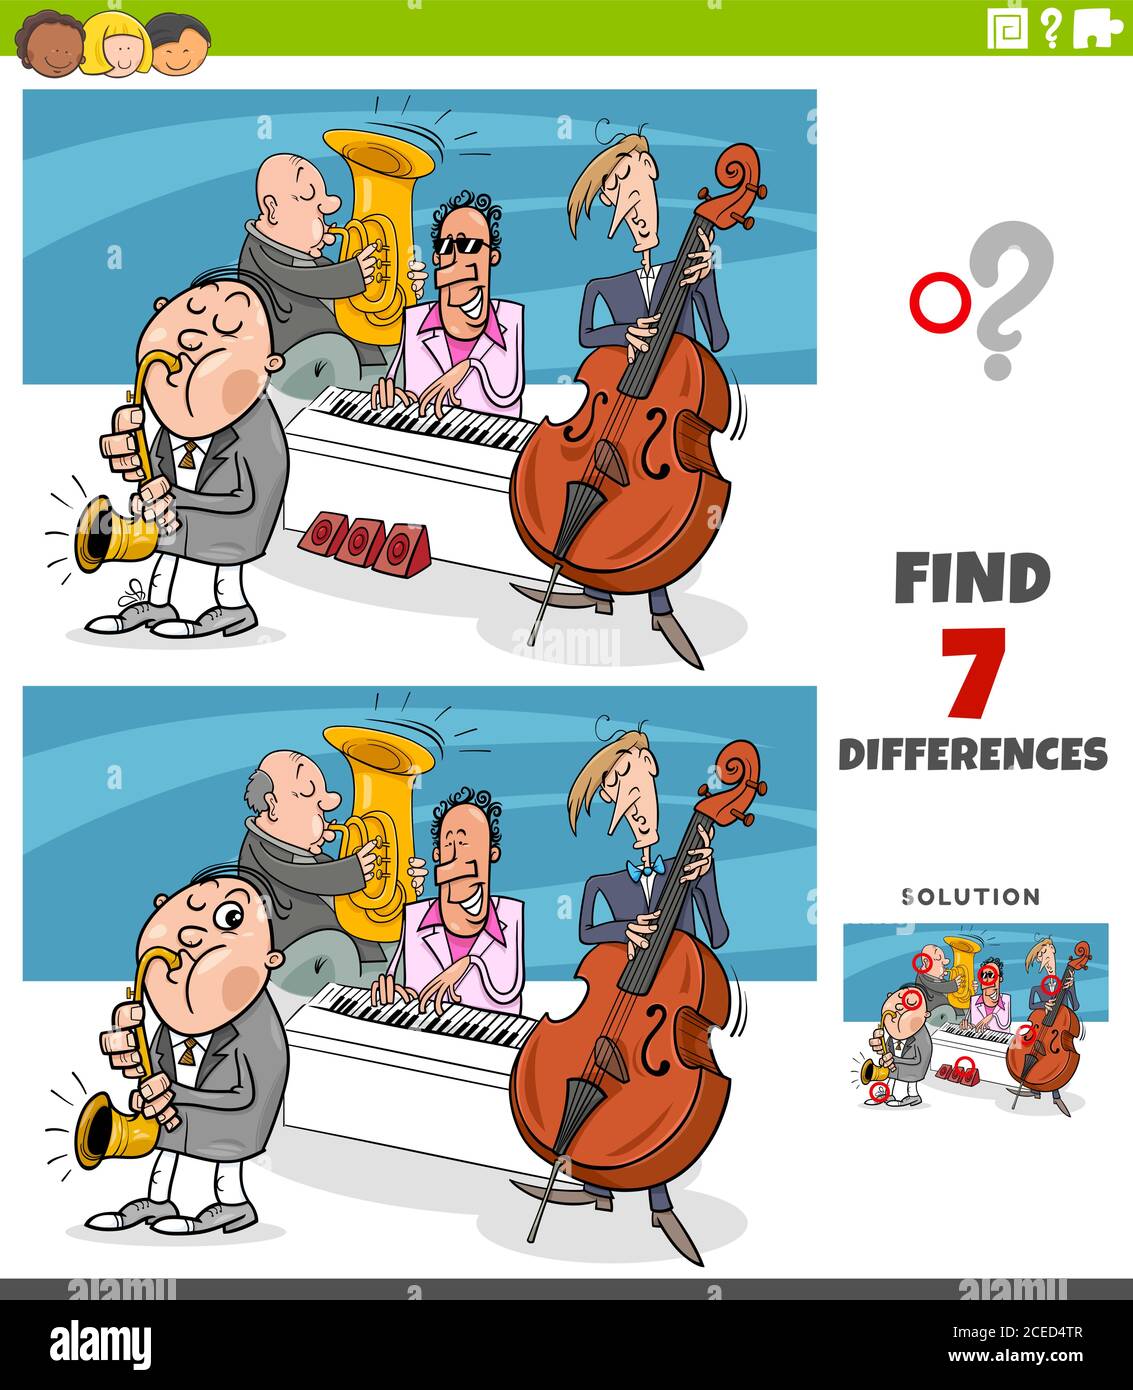 Cartoon Illustration of Finding Differences Between Pictures Educational Game for Children with Comic Jazz Band Musicians Characters Stock Vector